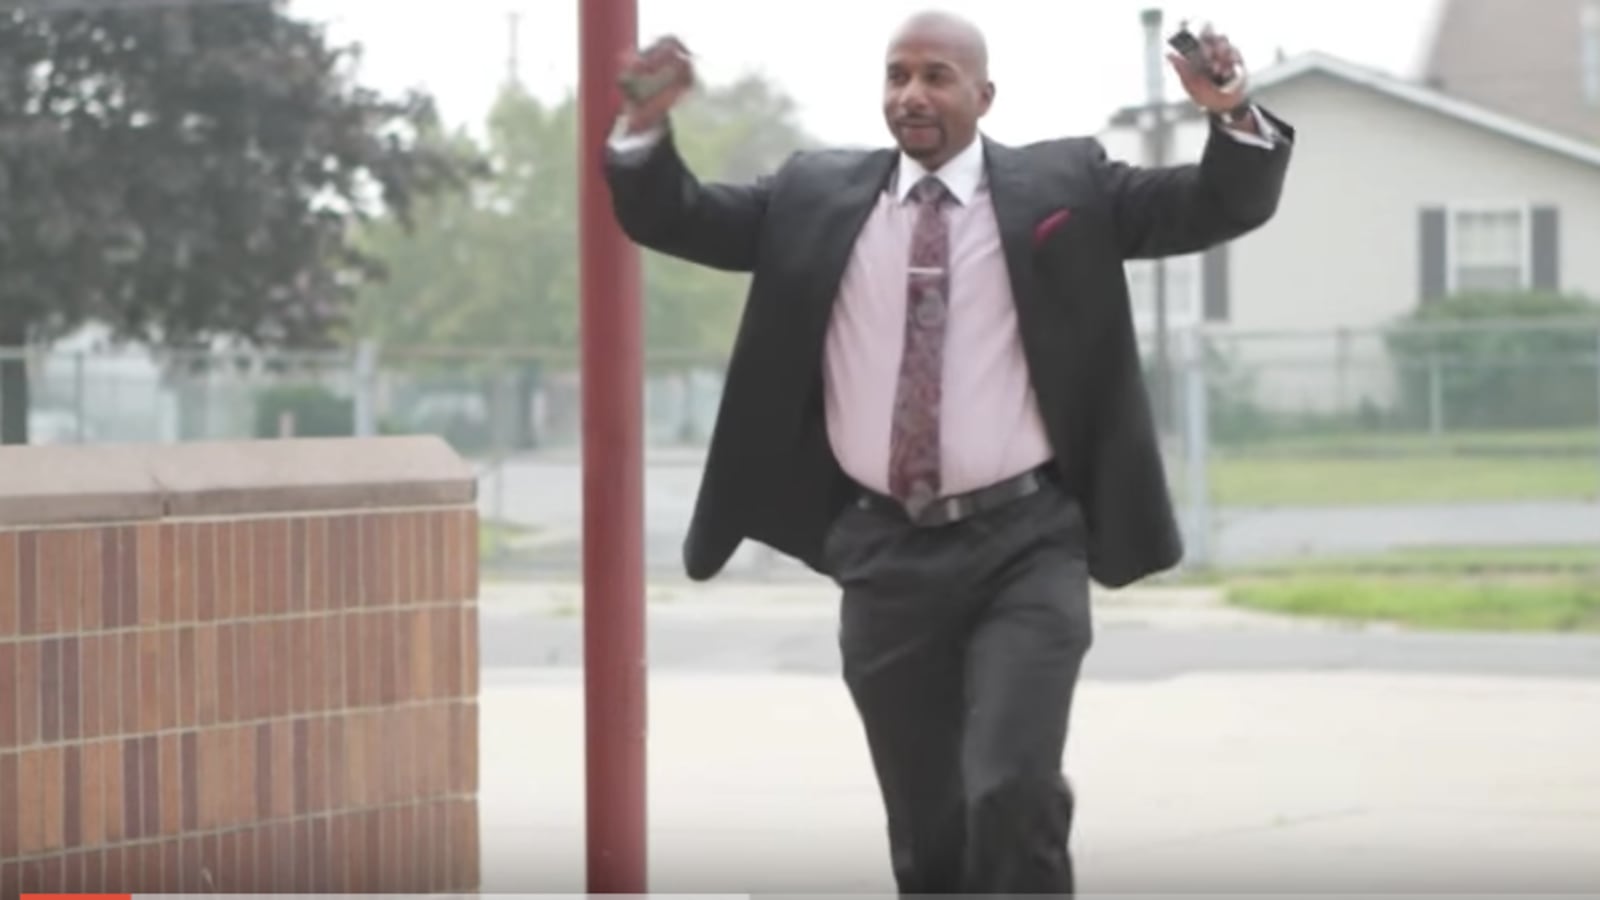 River Rouge Superintendent Derrick Coleman, one of two finalists to become the next leader of the Detroit Public Schools Community District, appeared in a 2012 video that called him a "school superhero."